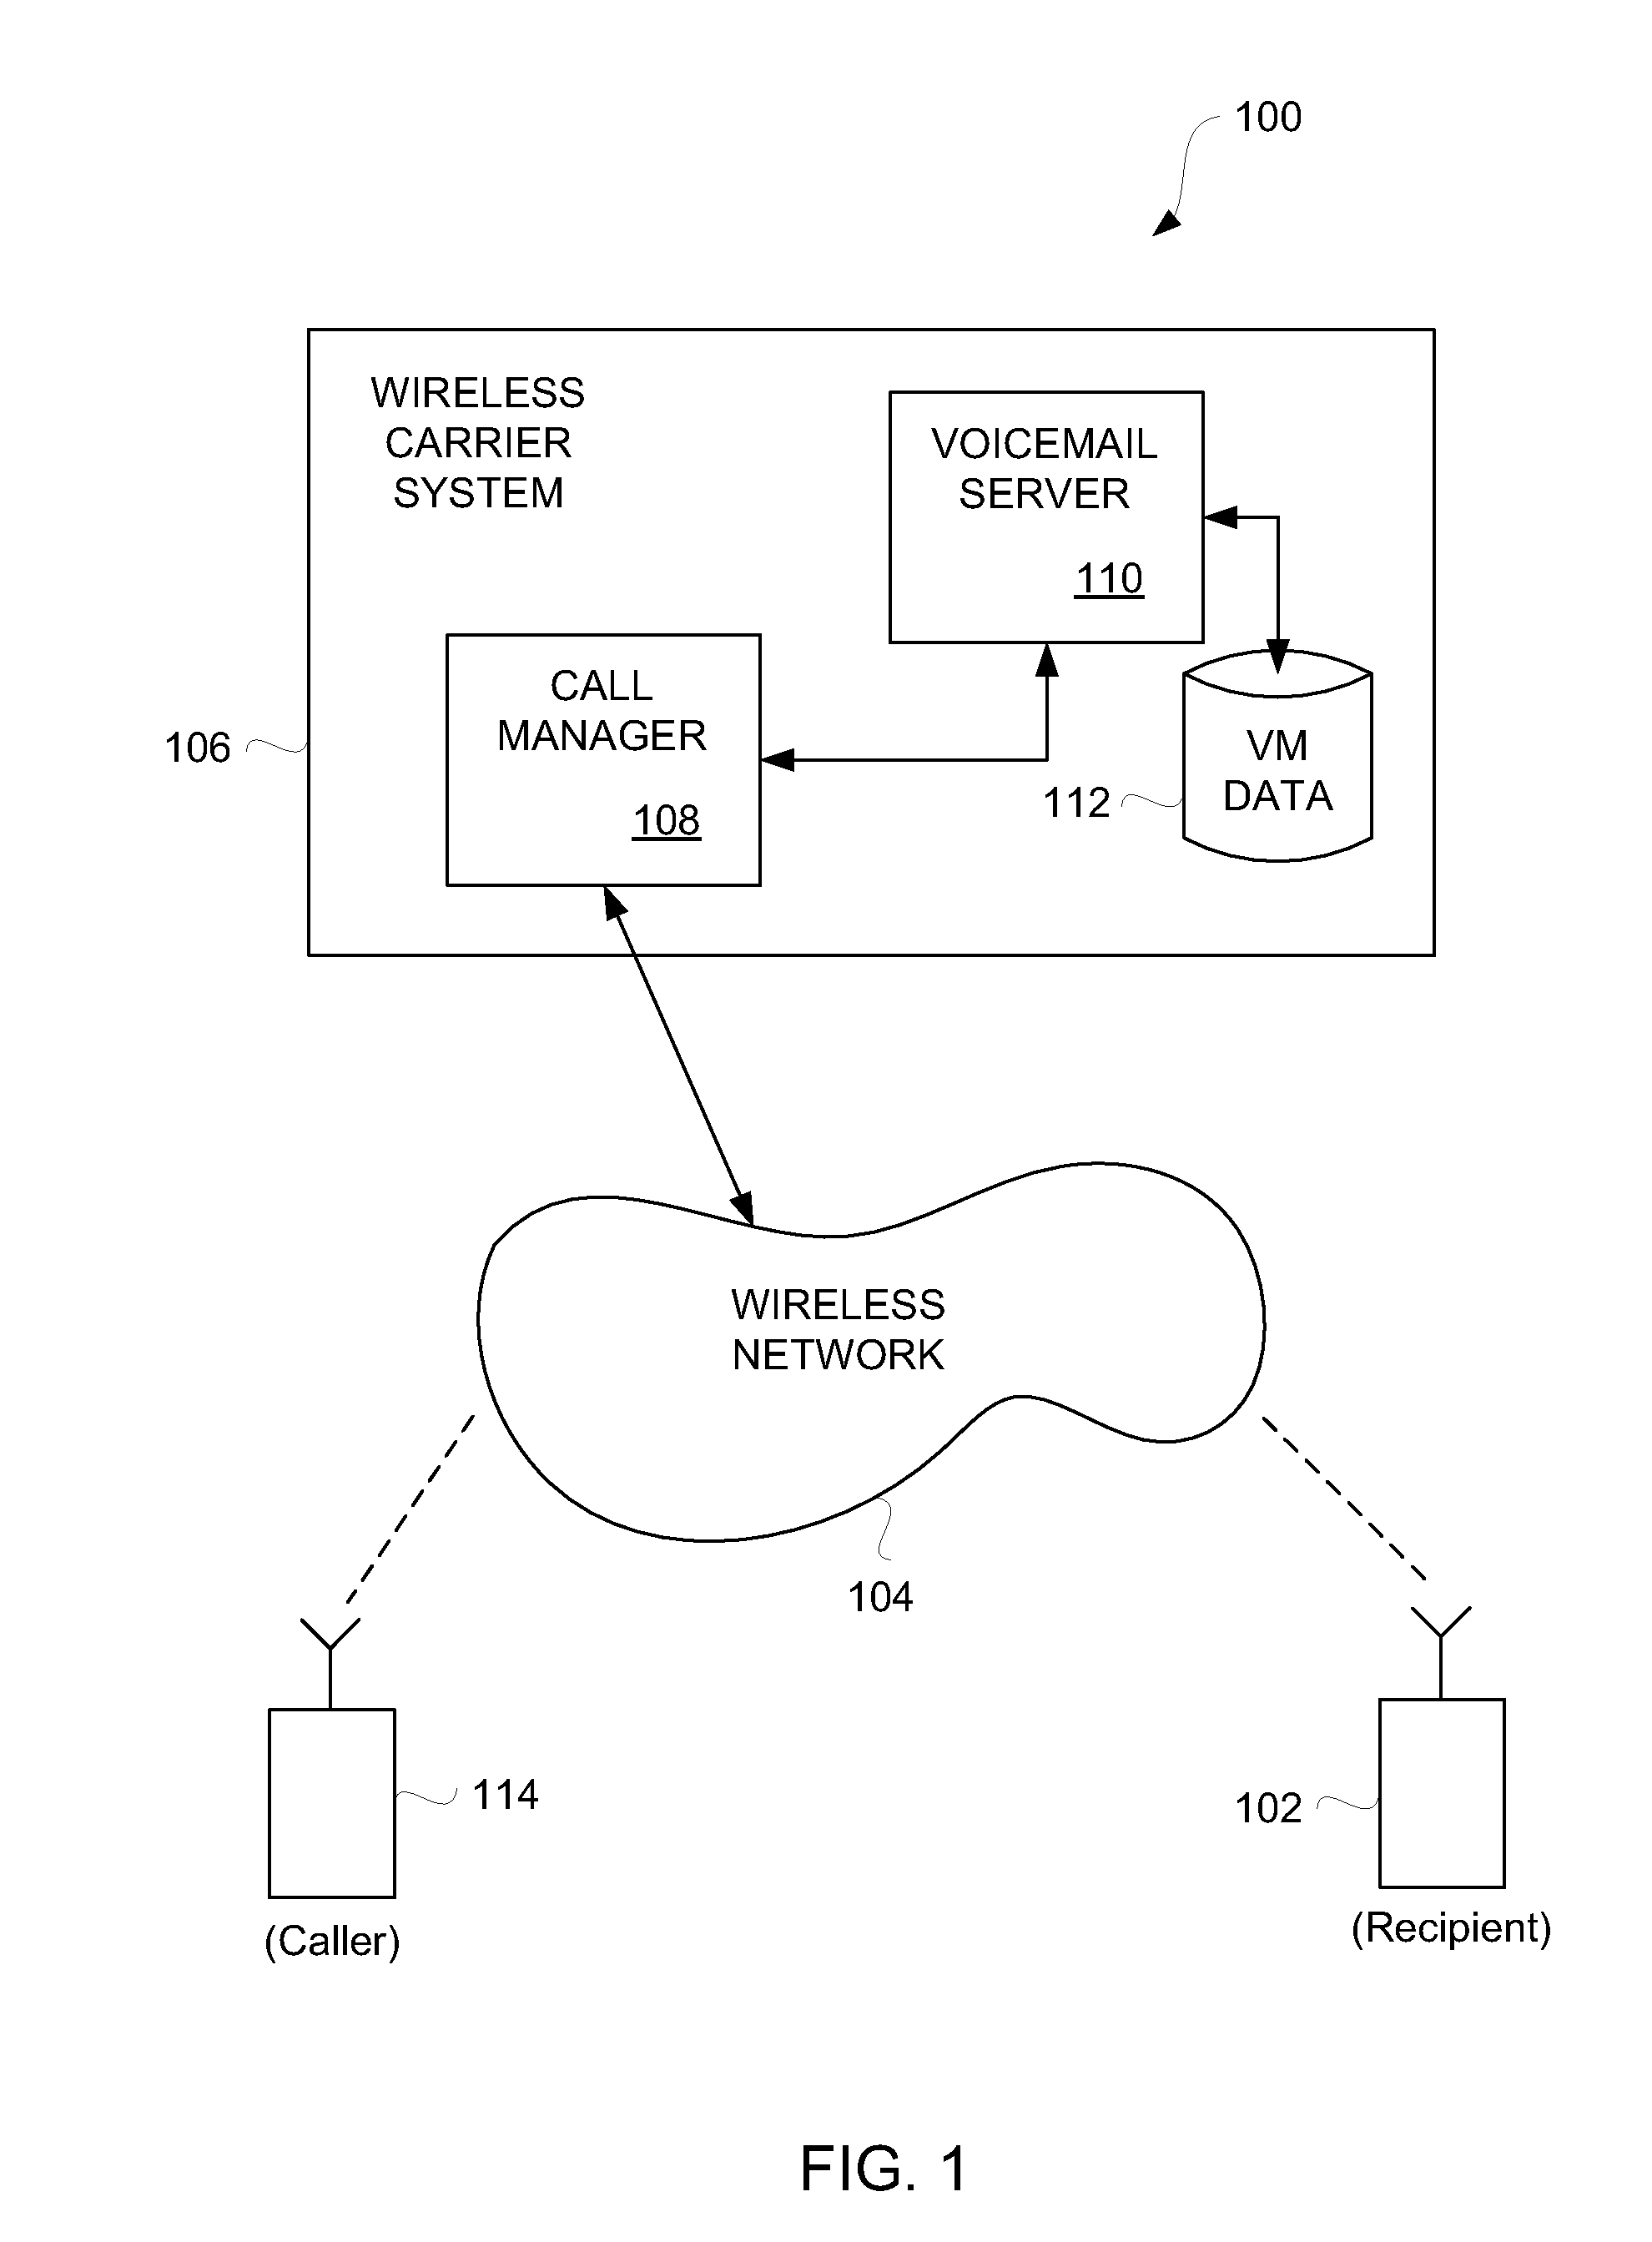 Creation and management of voicemail greetings for mobile communication devices